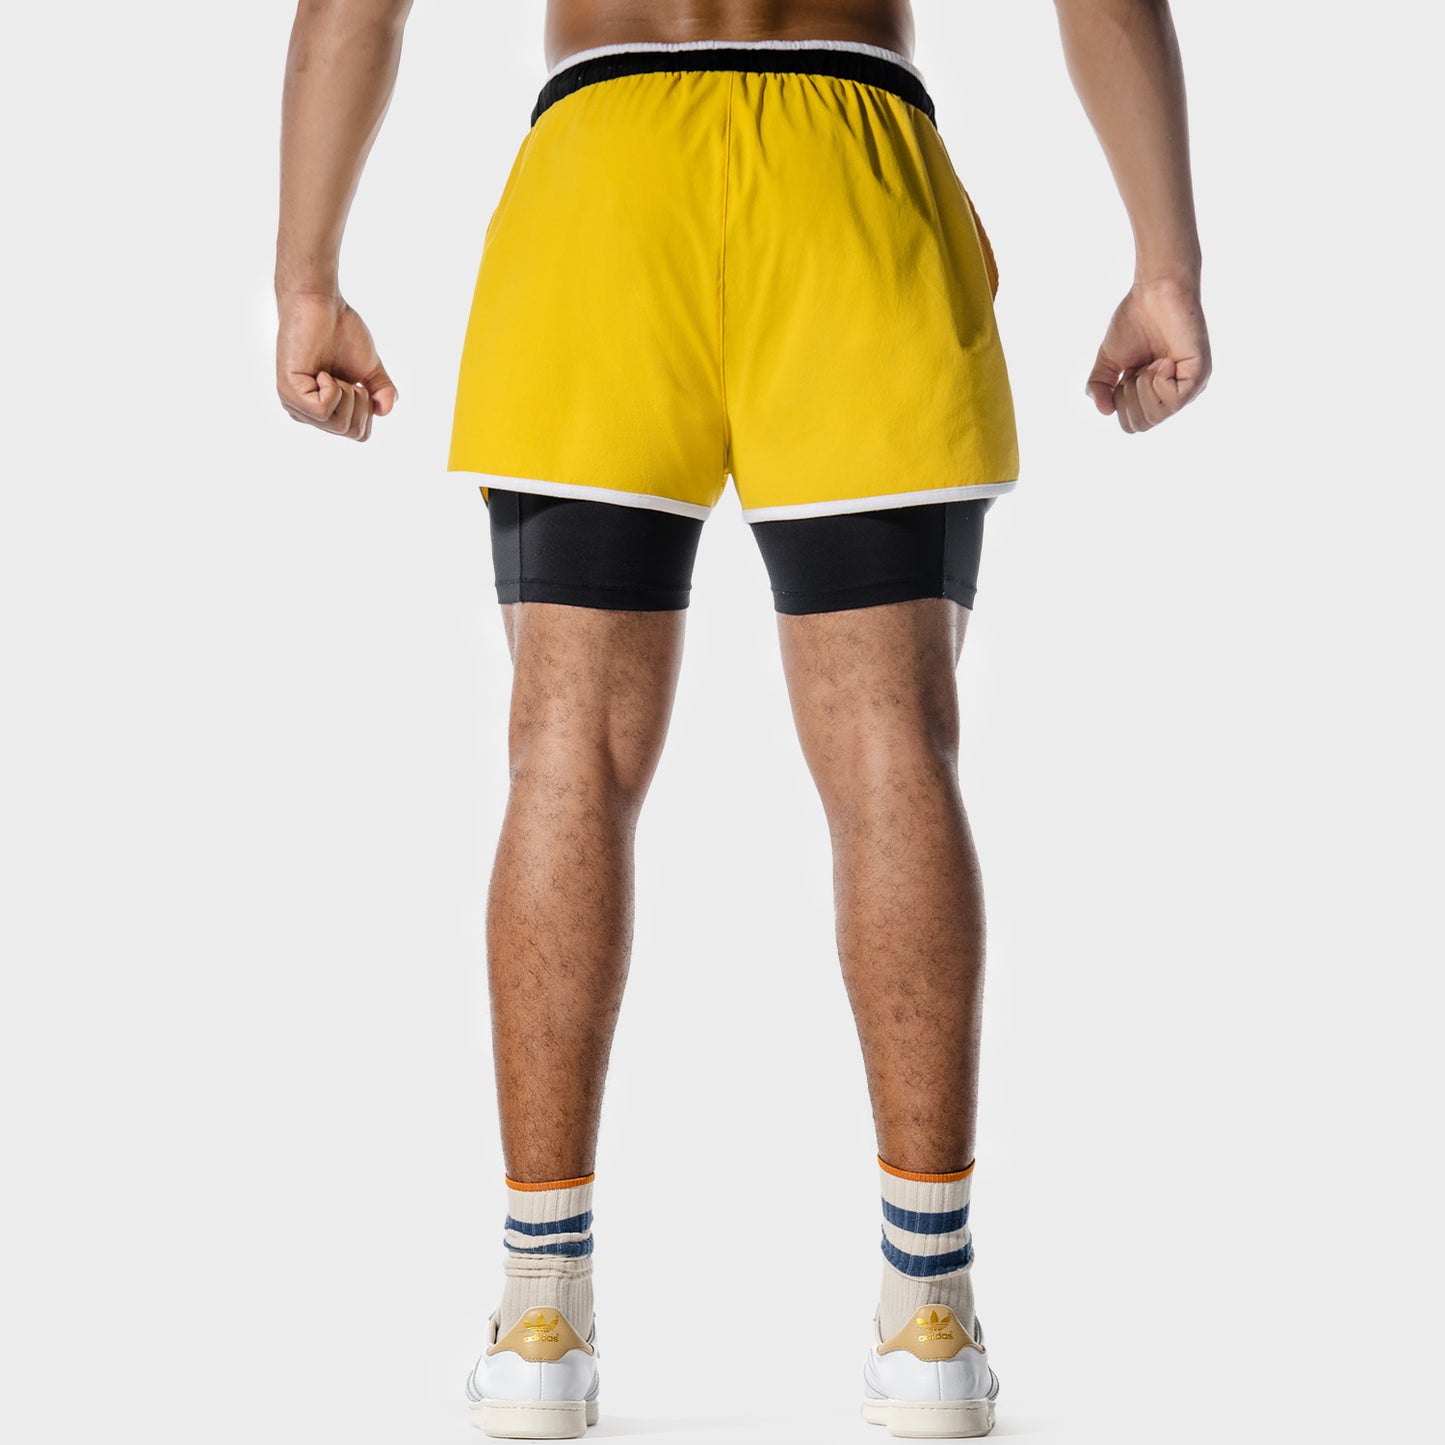 SQUATWOF-gym-wear-golden-era-2-in-1-shorts-yellow-workout-shorts-for-men